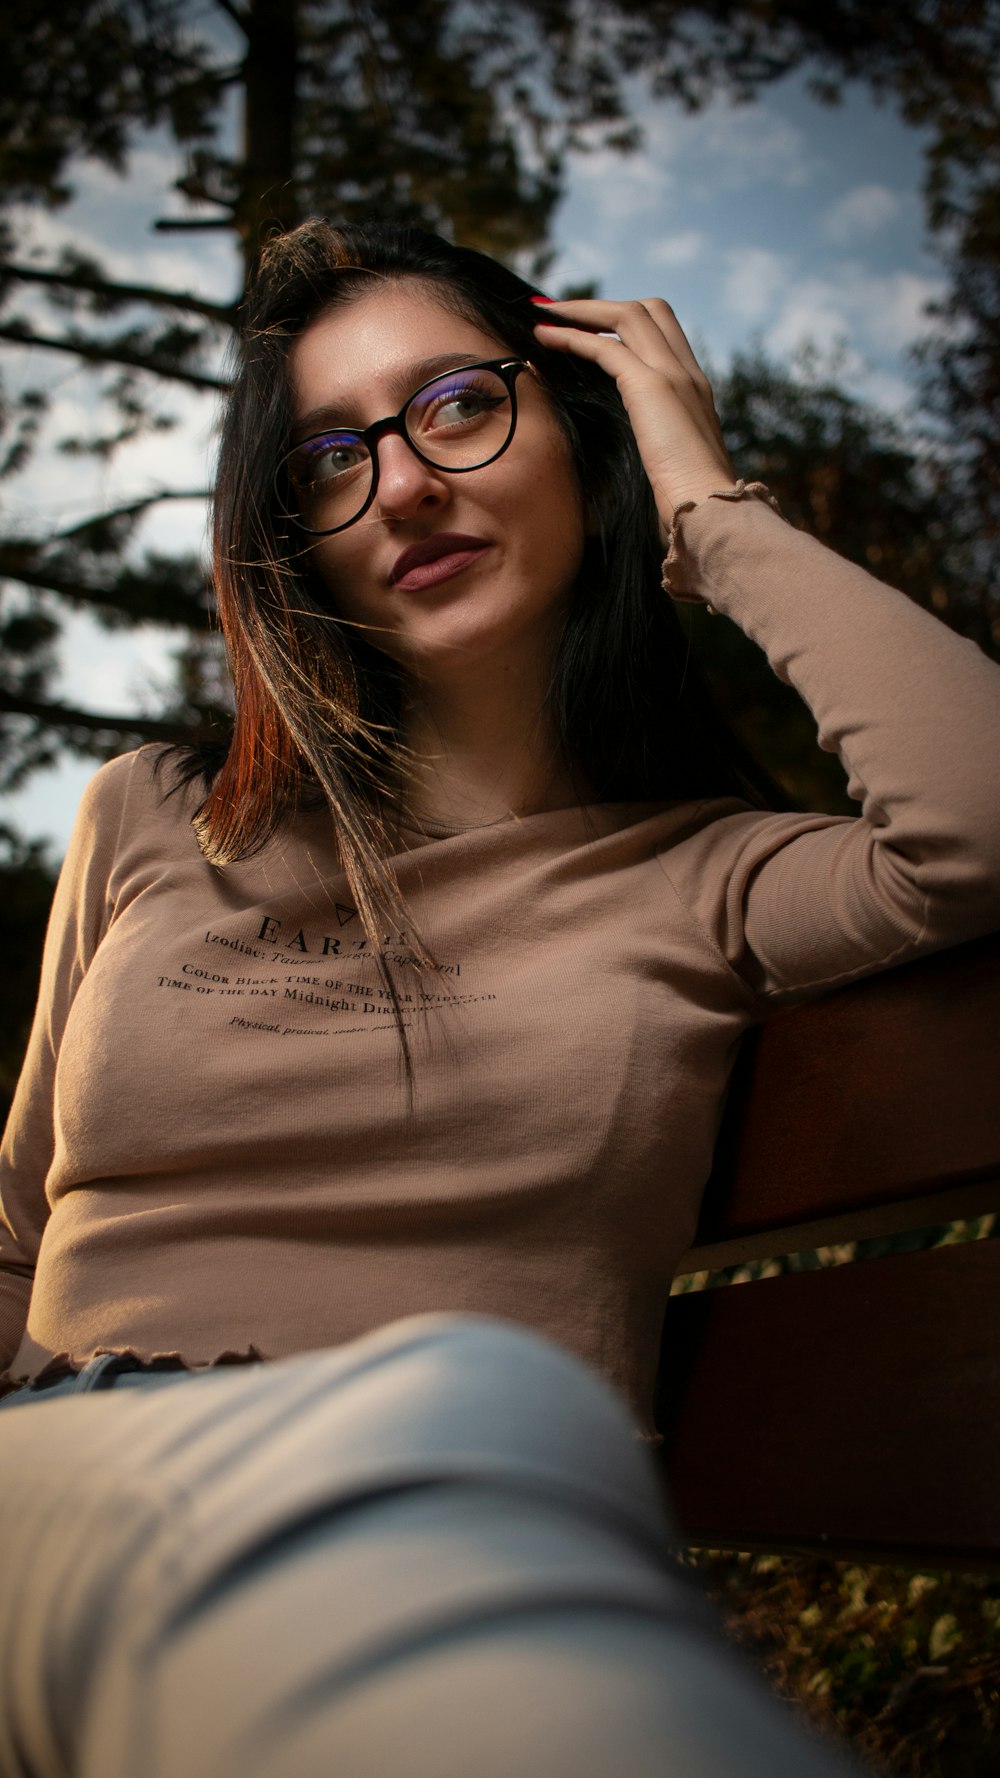 a woman wearing glasses sitting on a bench